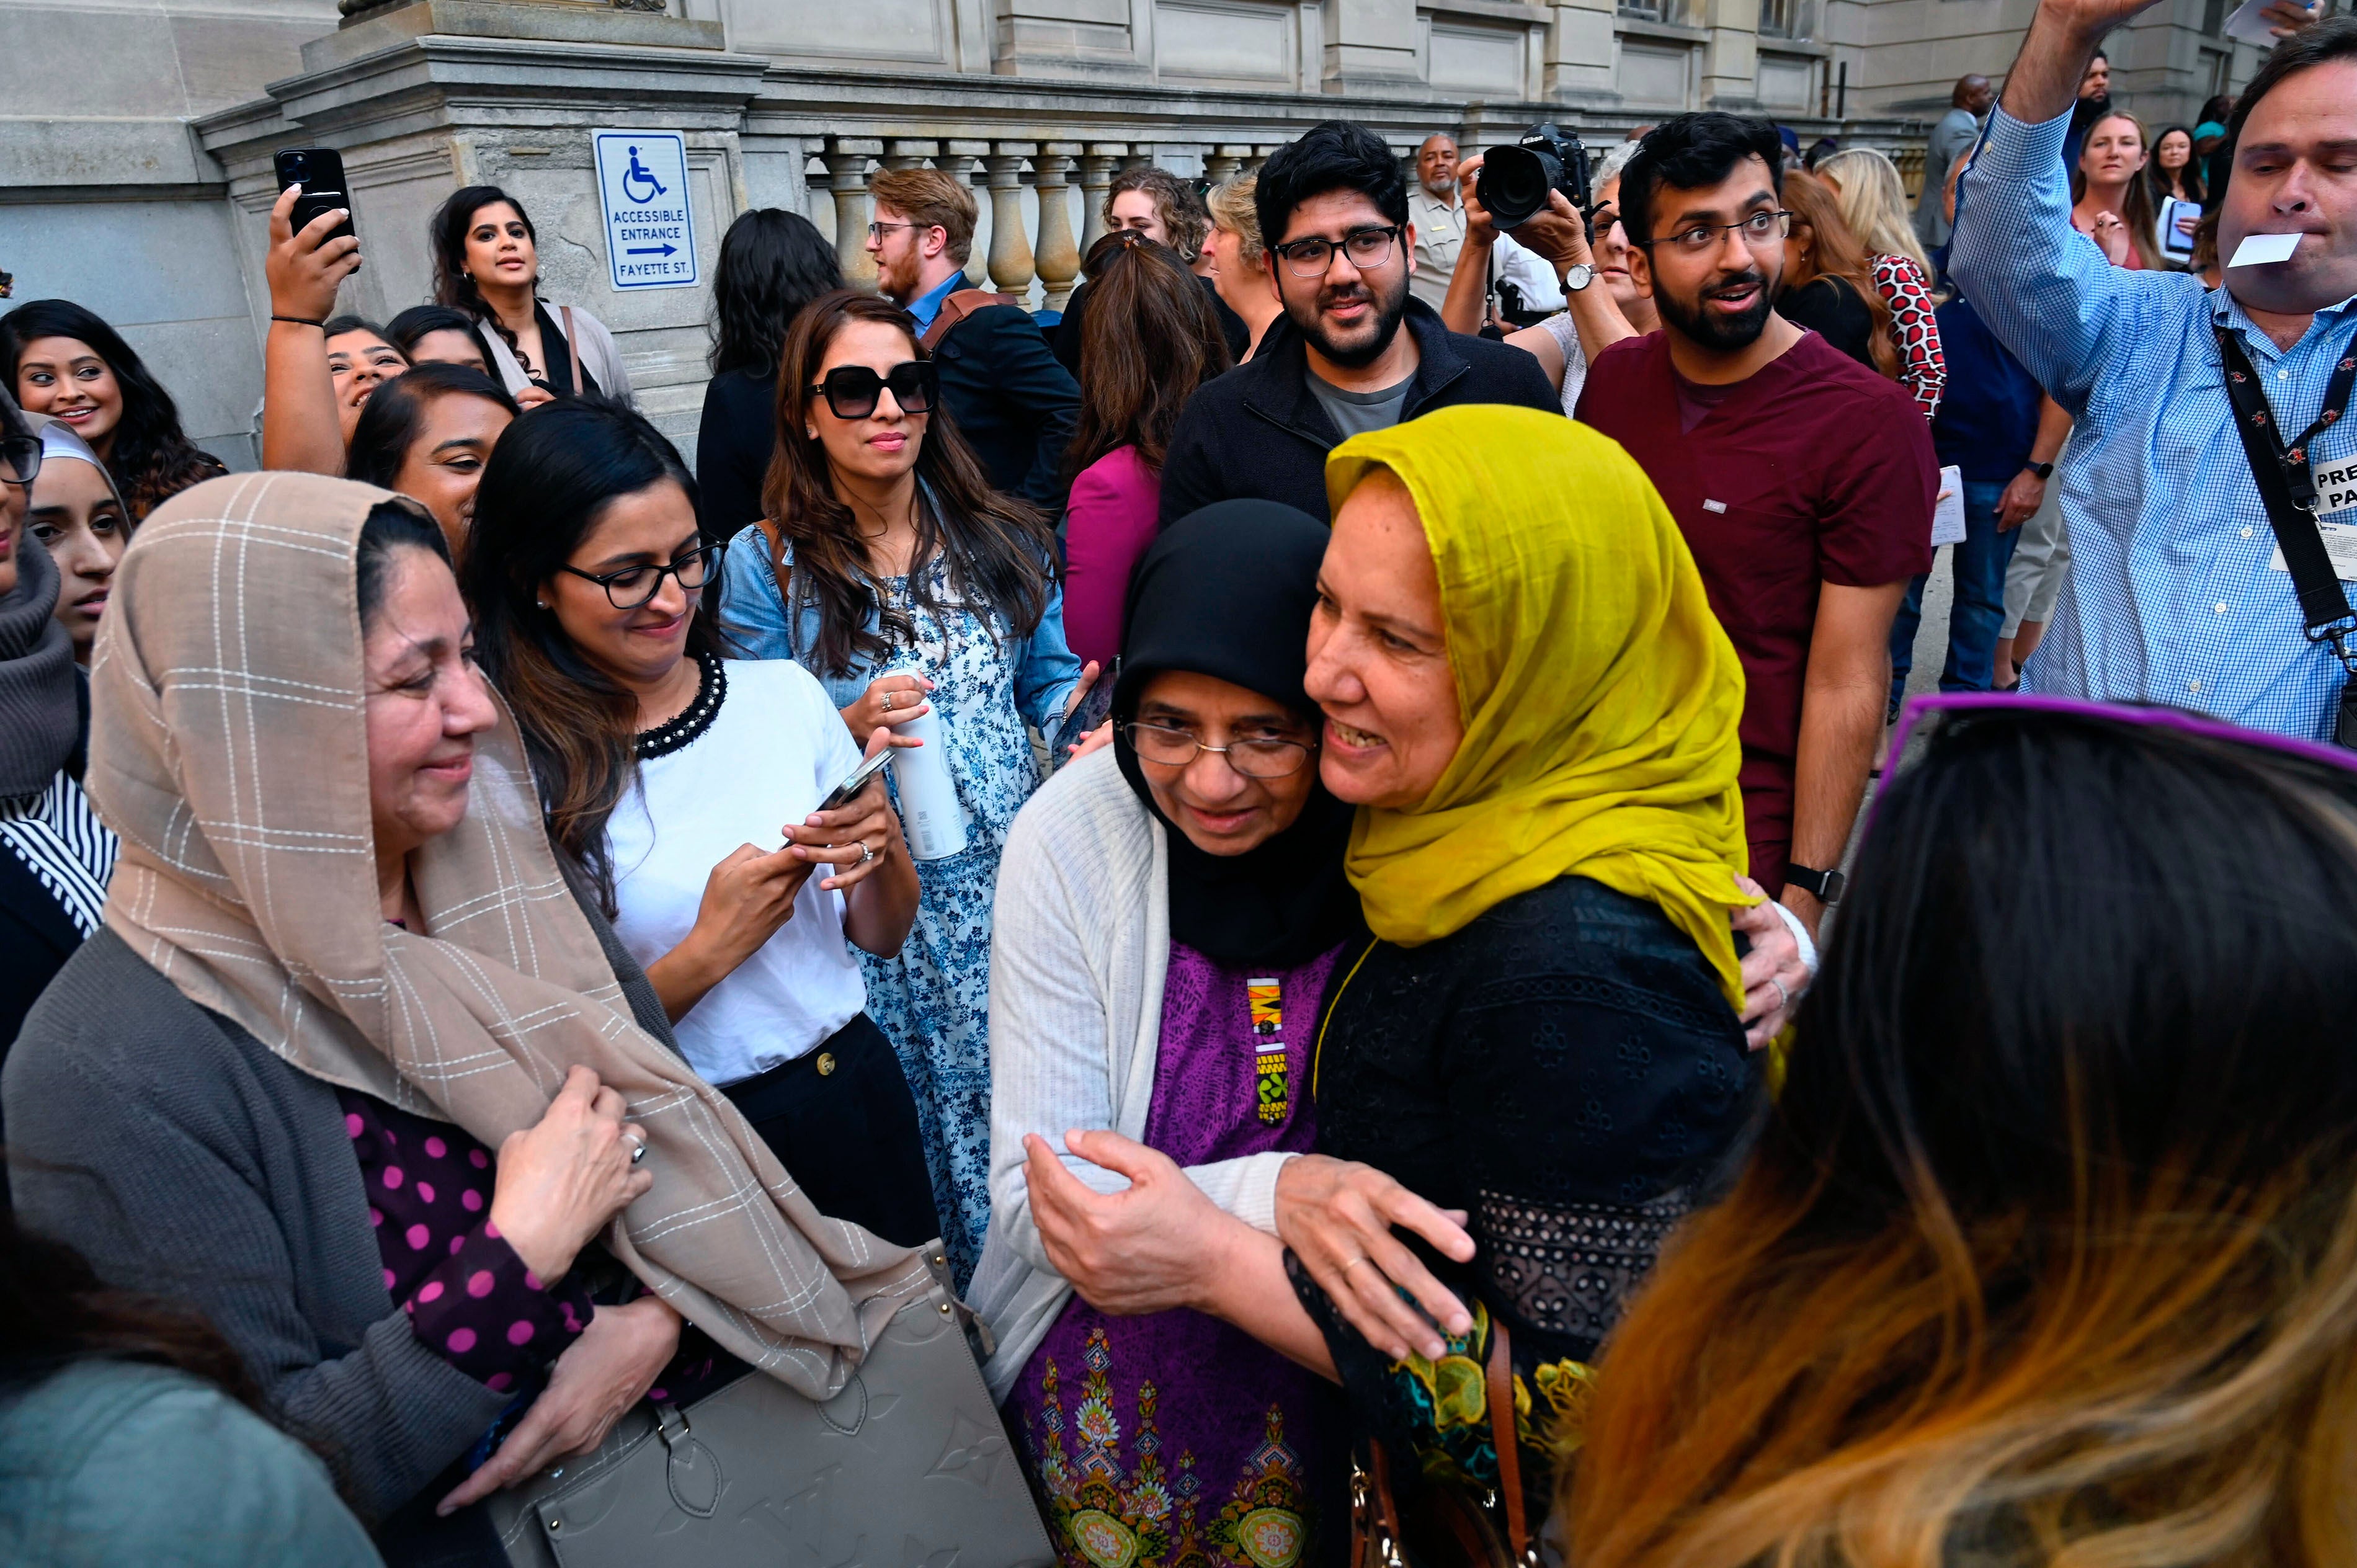 Adnan Syed’s mother, Shamim Syed, center right, celebrates with friends outside of the courthouse on Monday